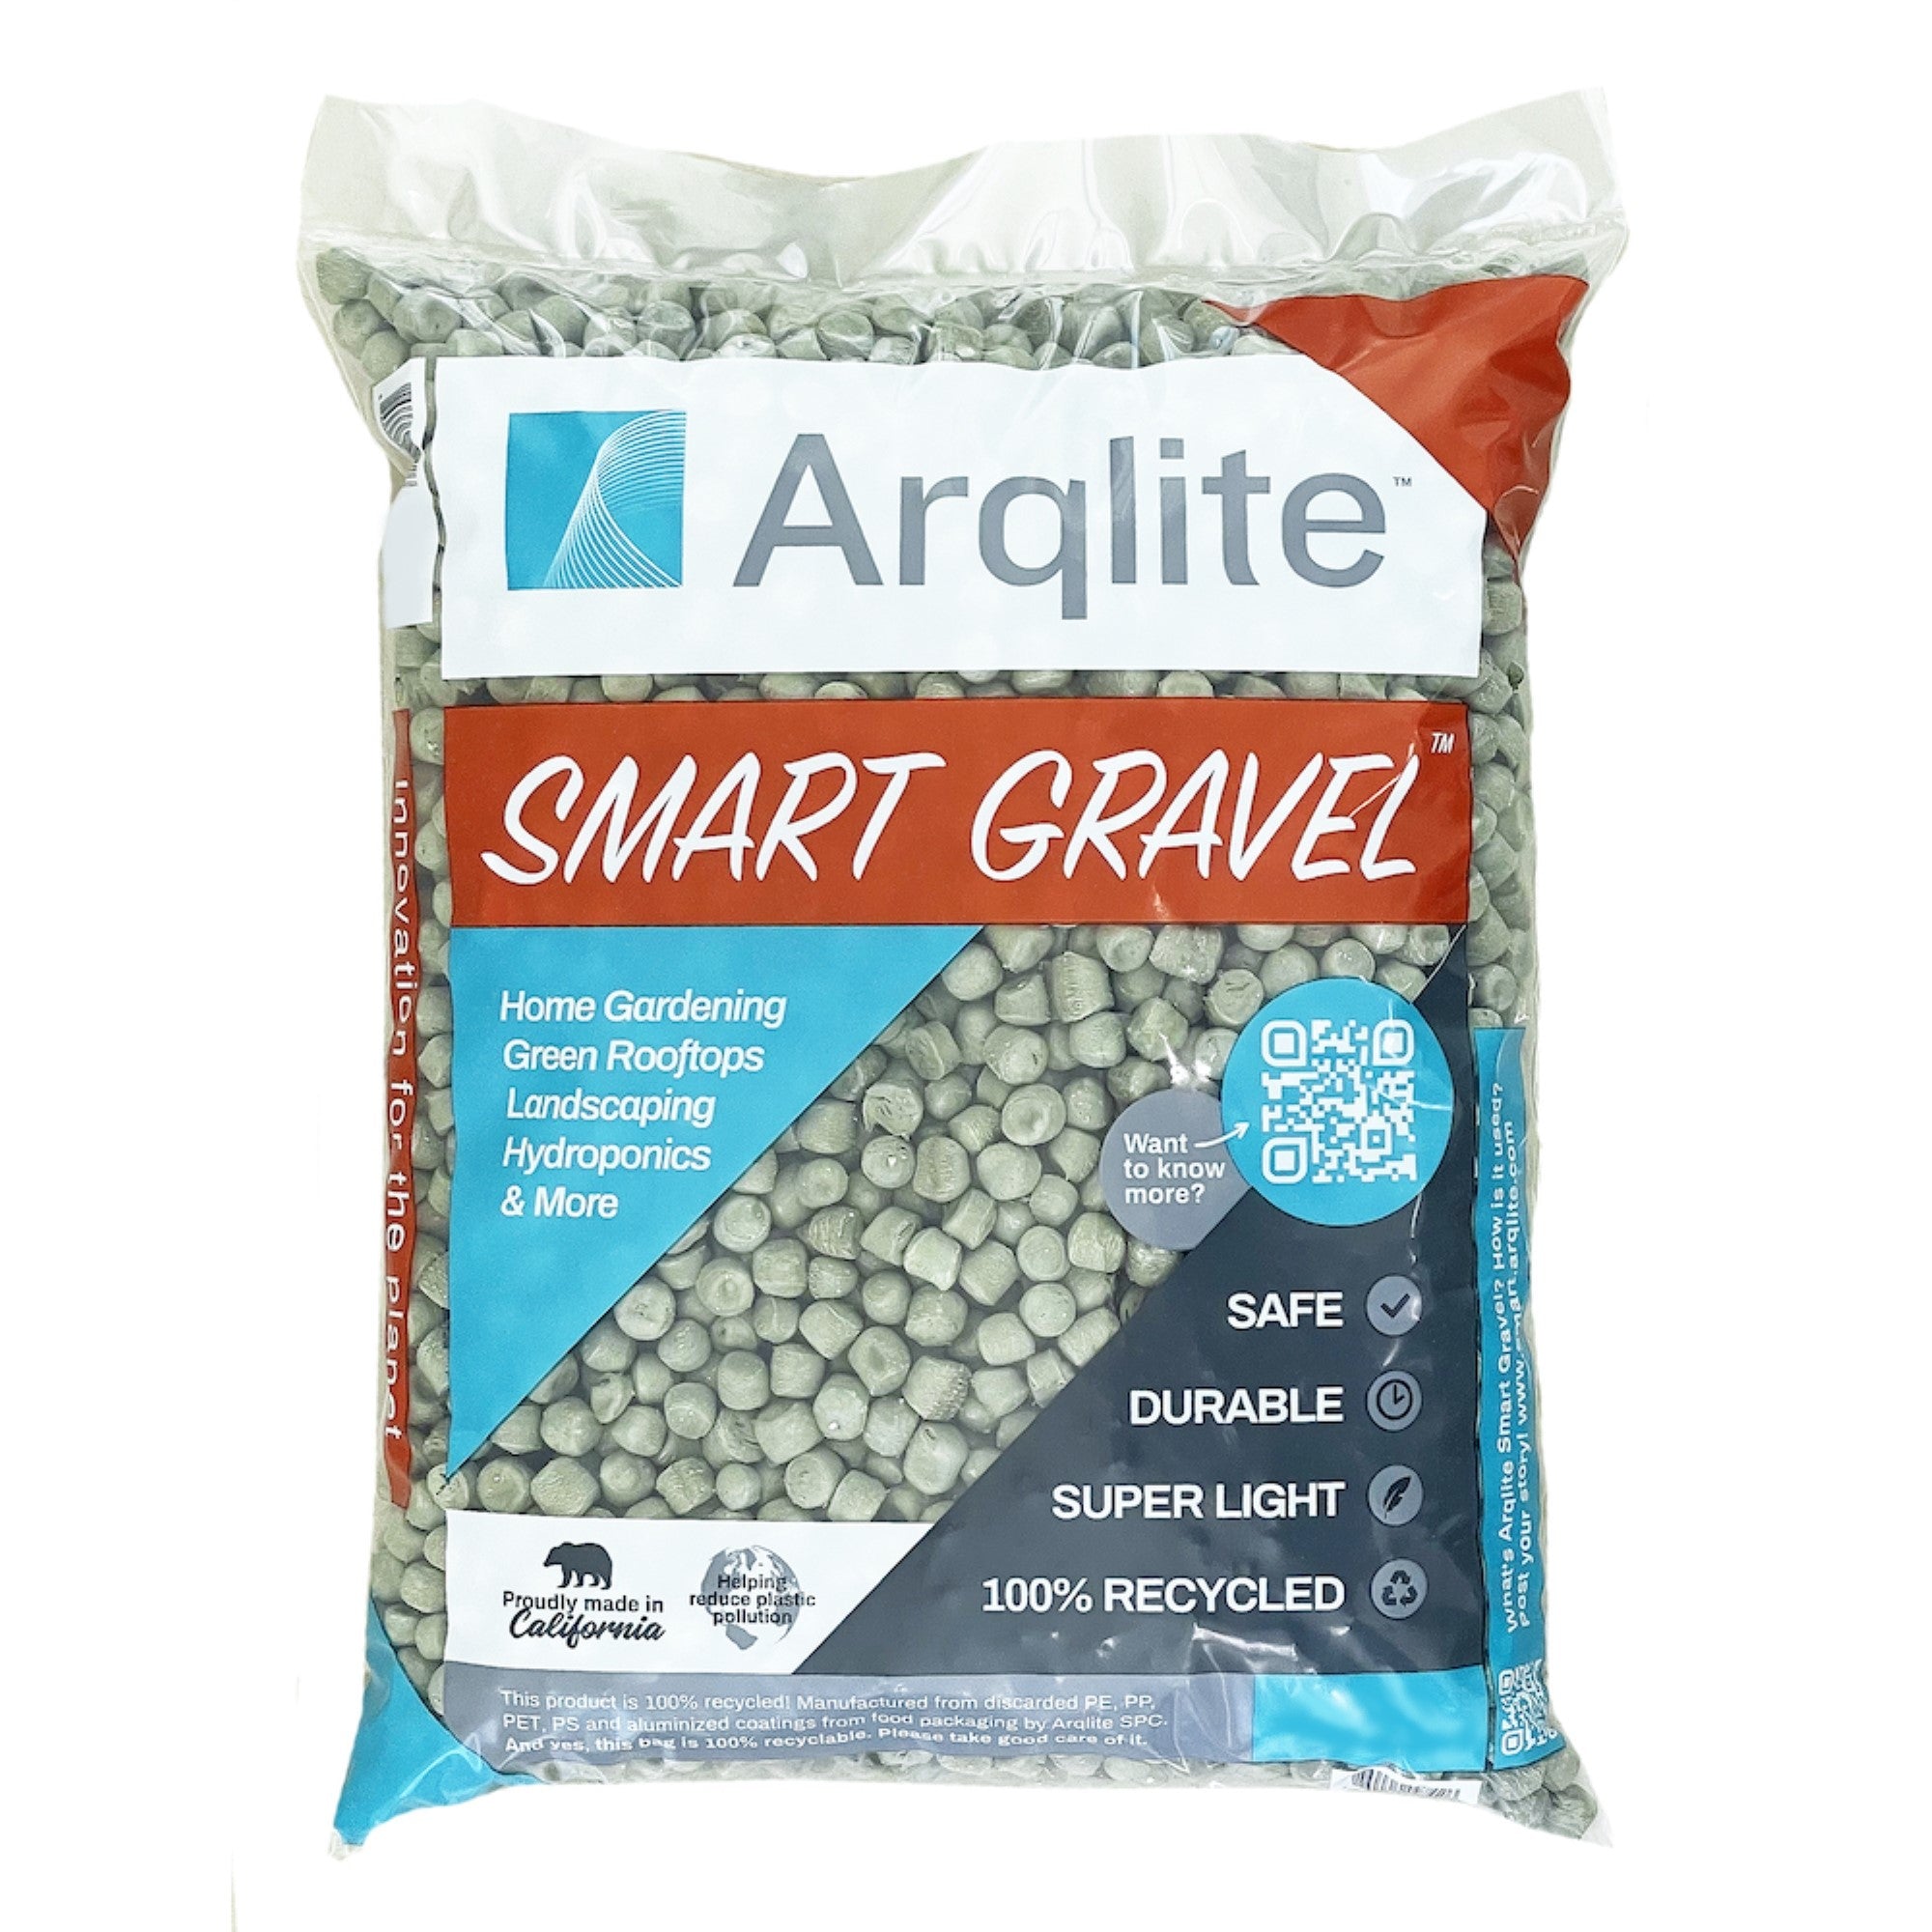 ARQLITE Smart Gravel Hydroponic Growth Media - Dust-Free, Reusable Substrate for Hydroponics & Aeroponics